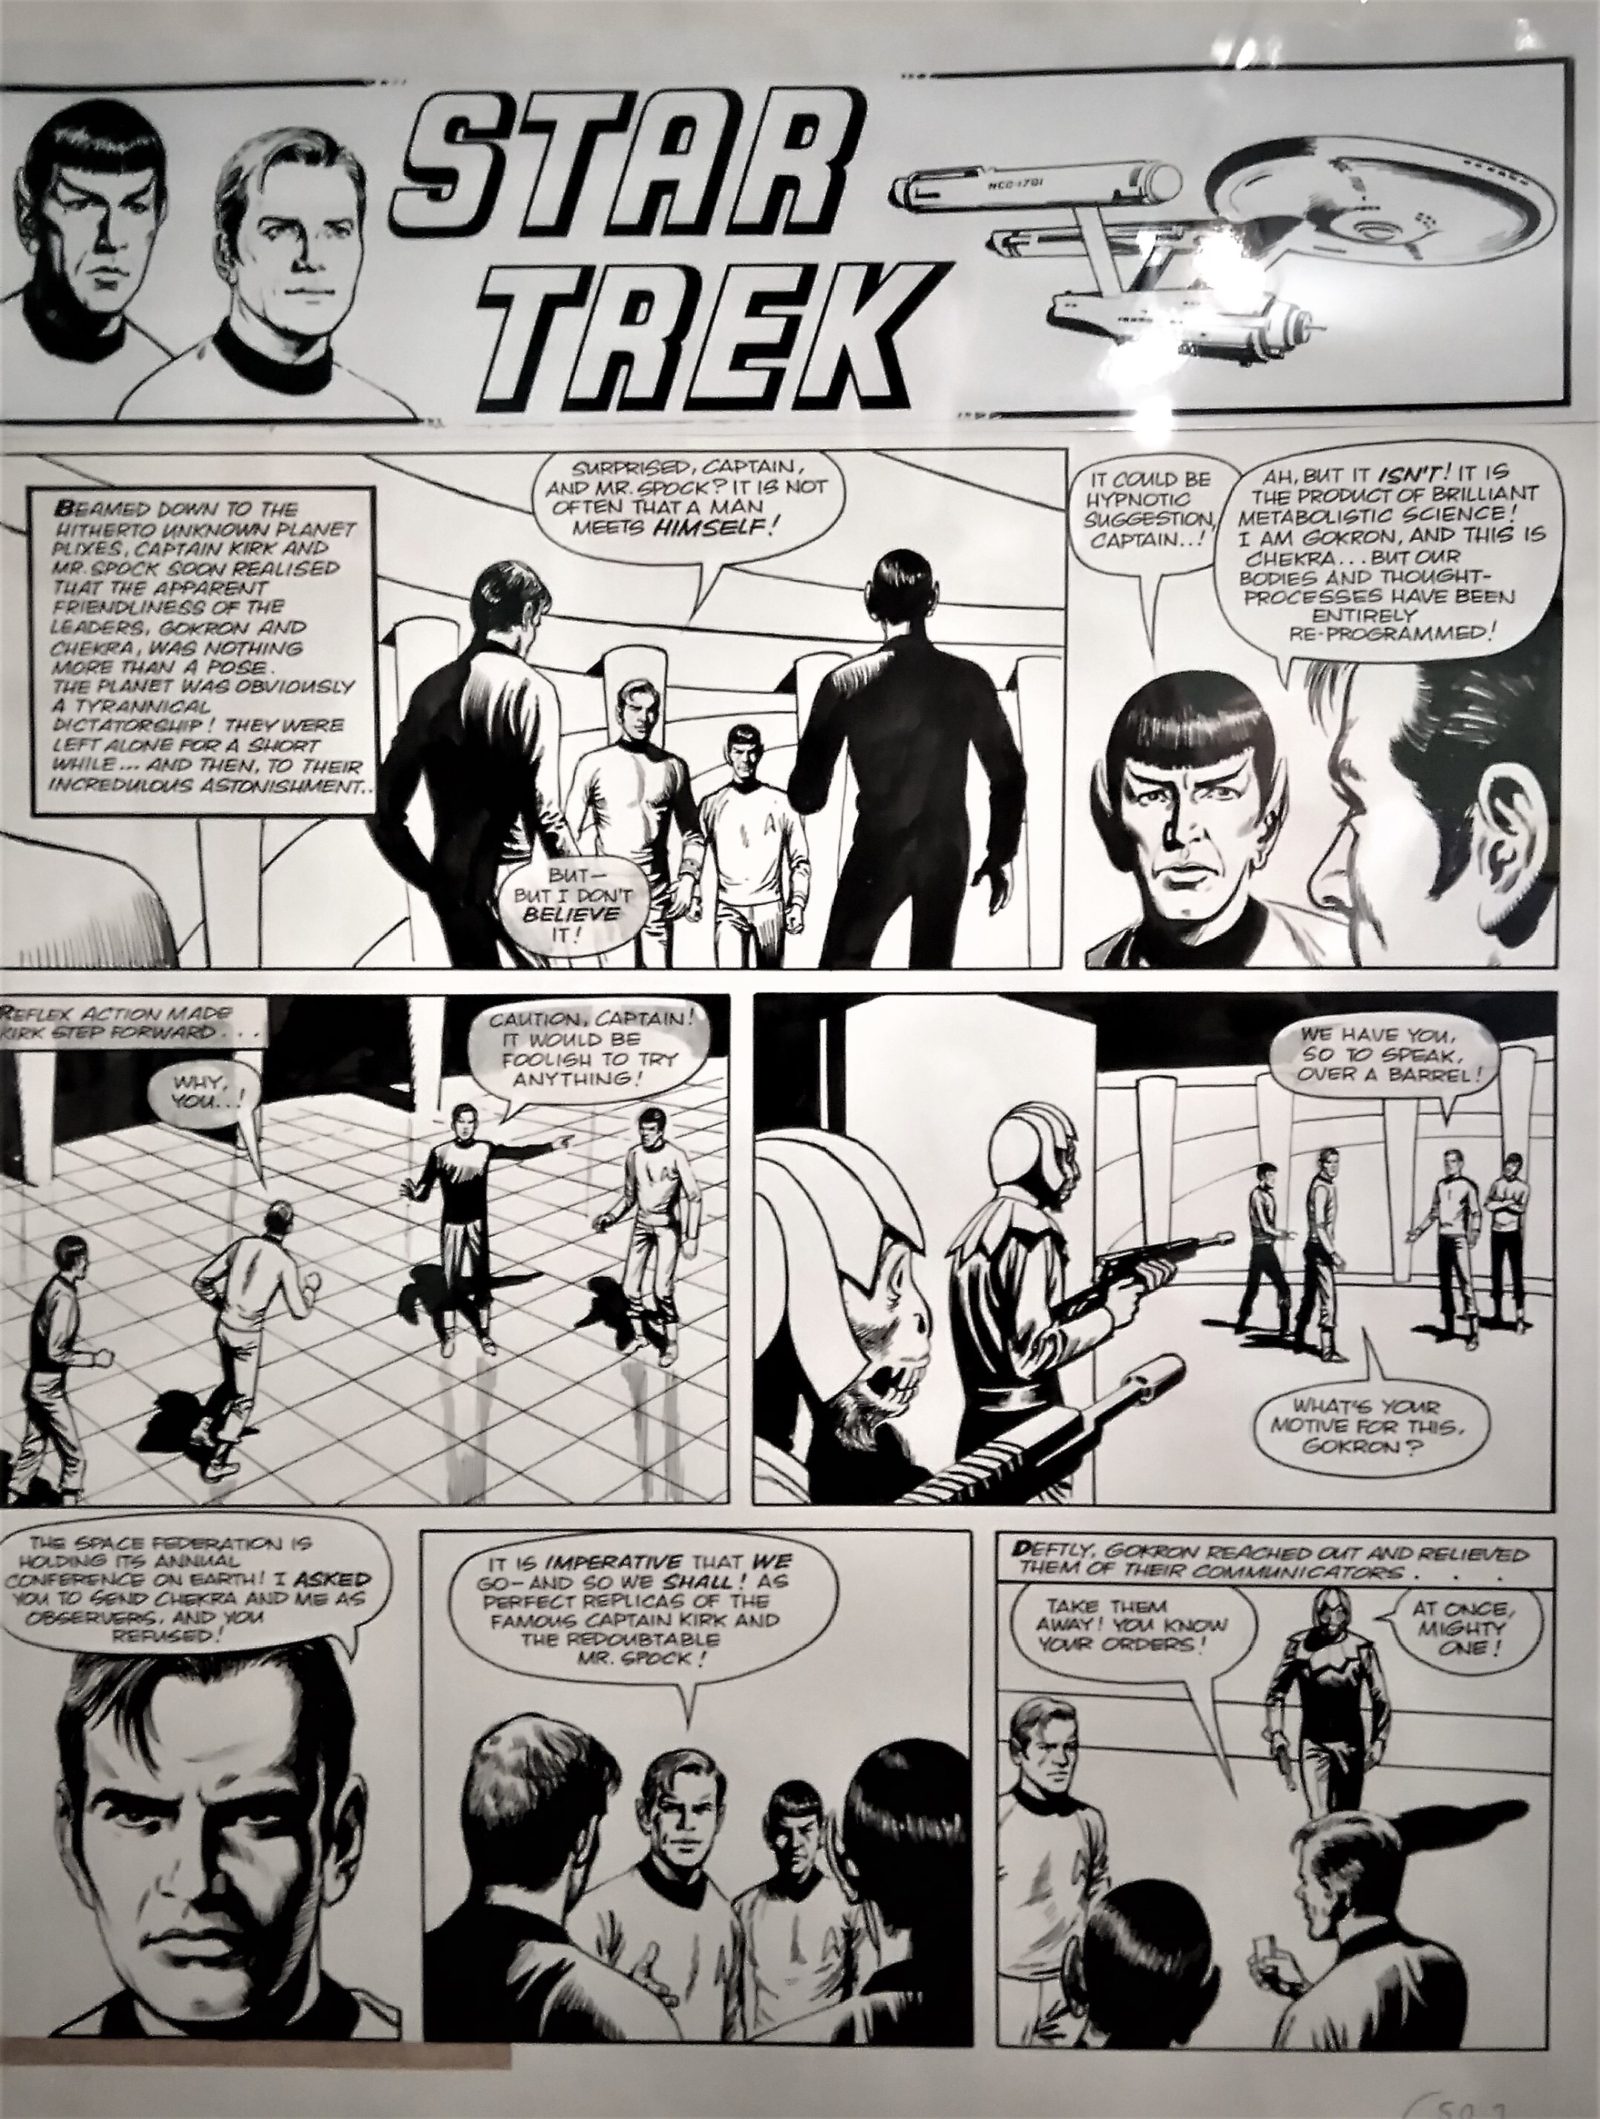 Star Trek art by John Stokes, for Valiant and TV21, published in the 1970s